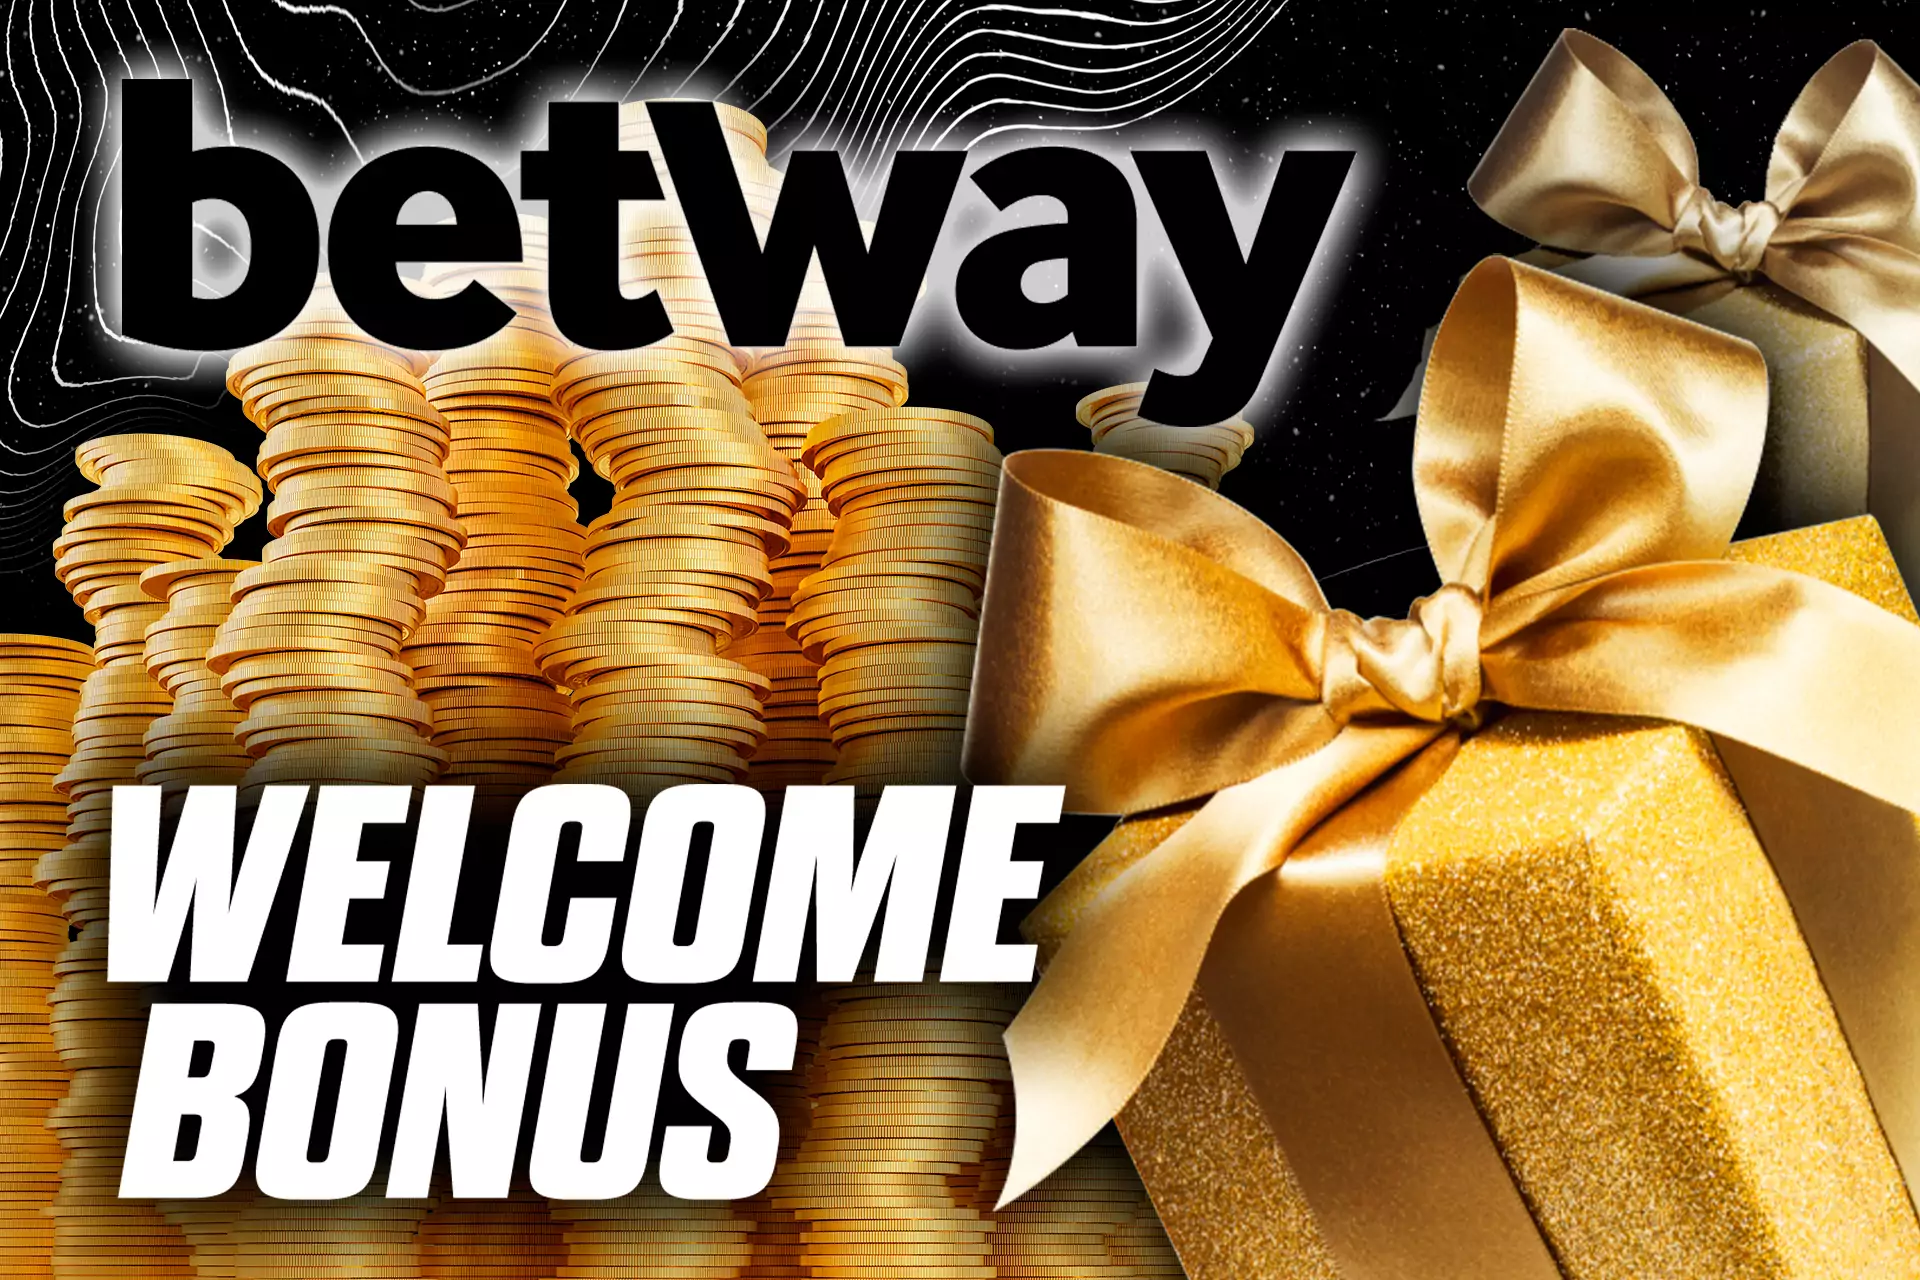 Betway offers an online casino welcome bonus of up to INR 15,000 on your first deposit.